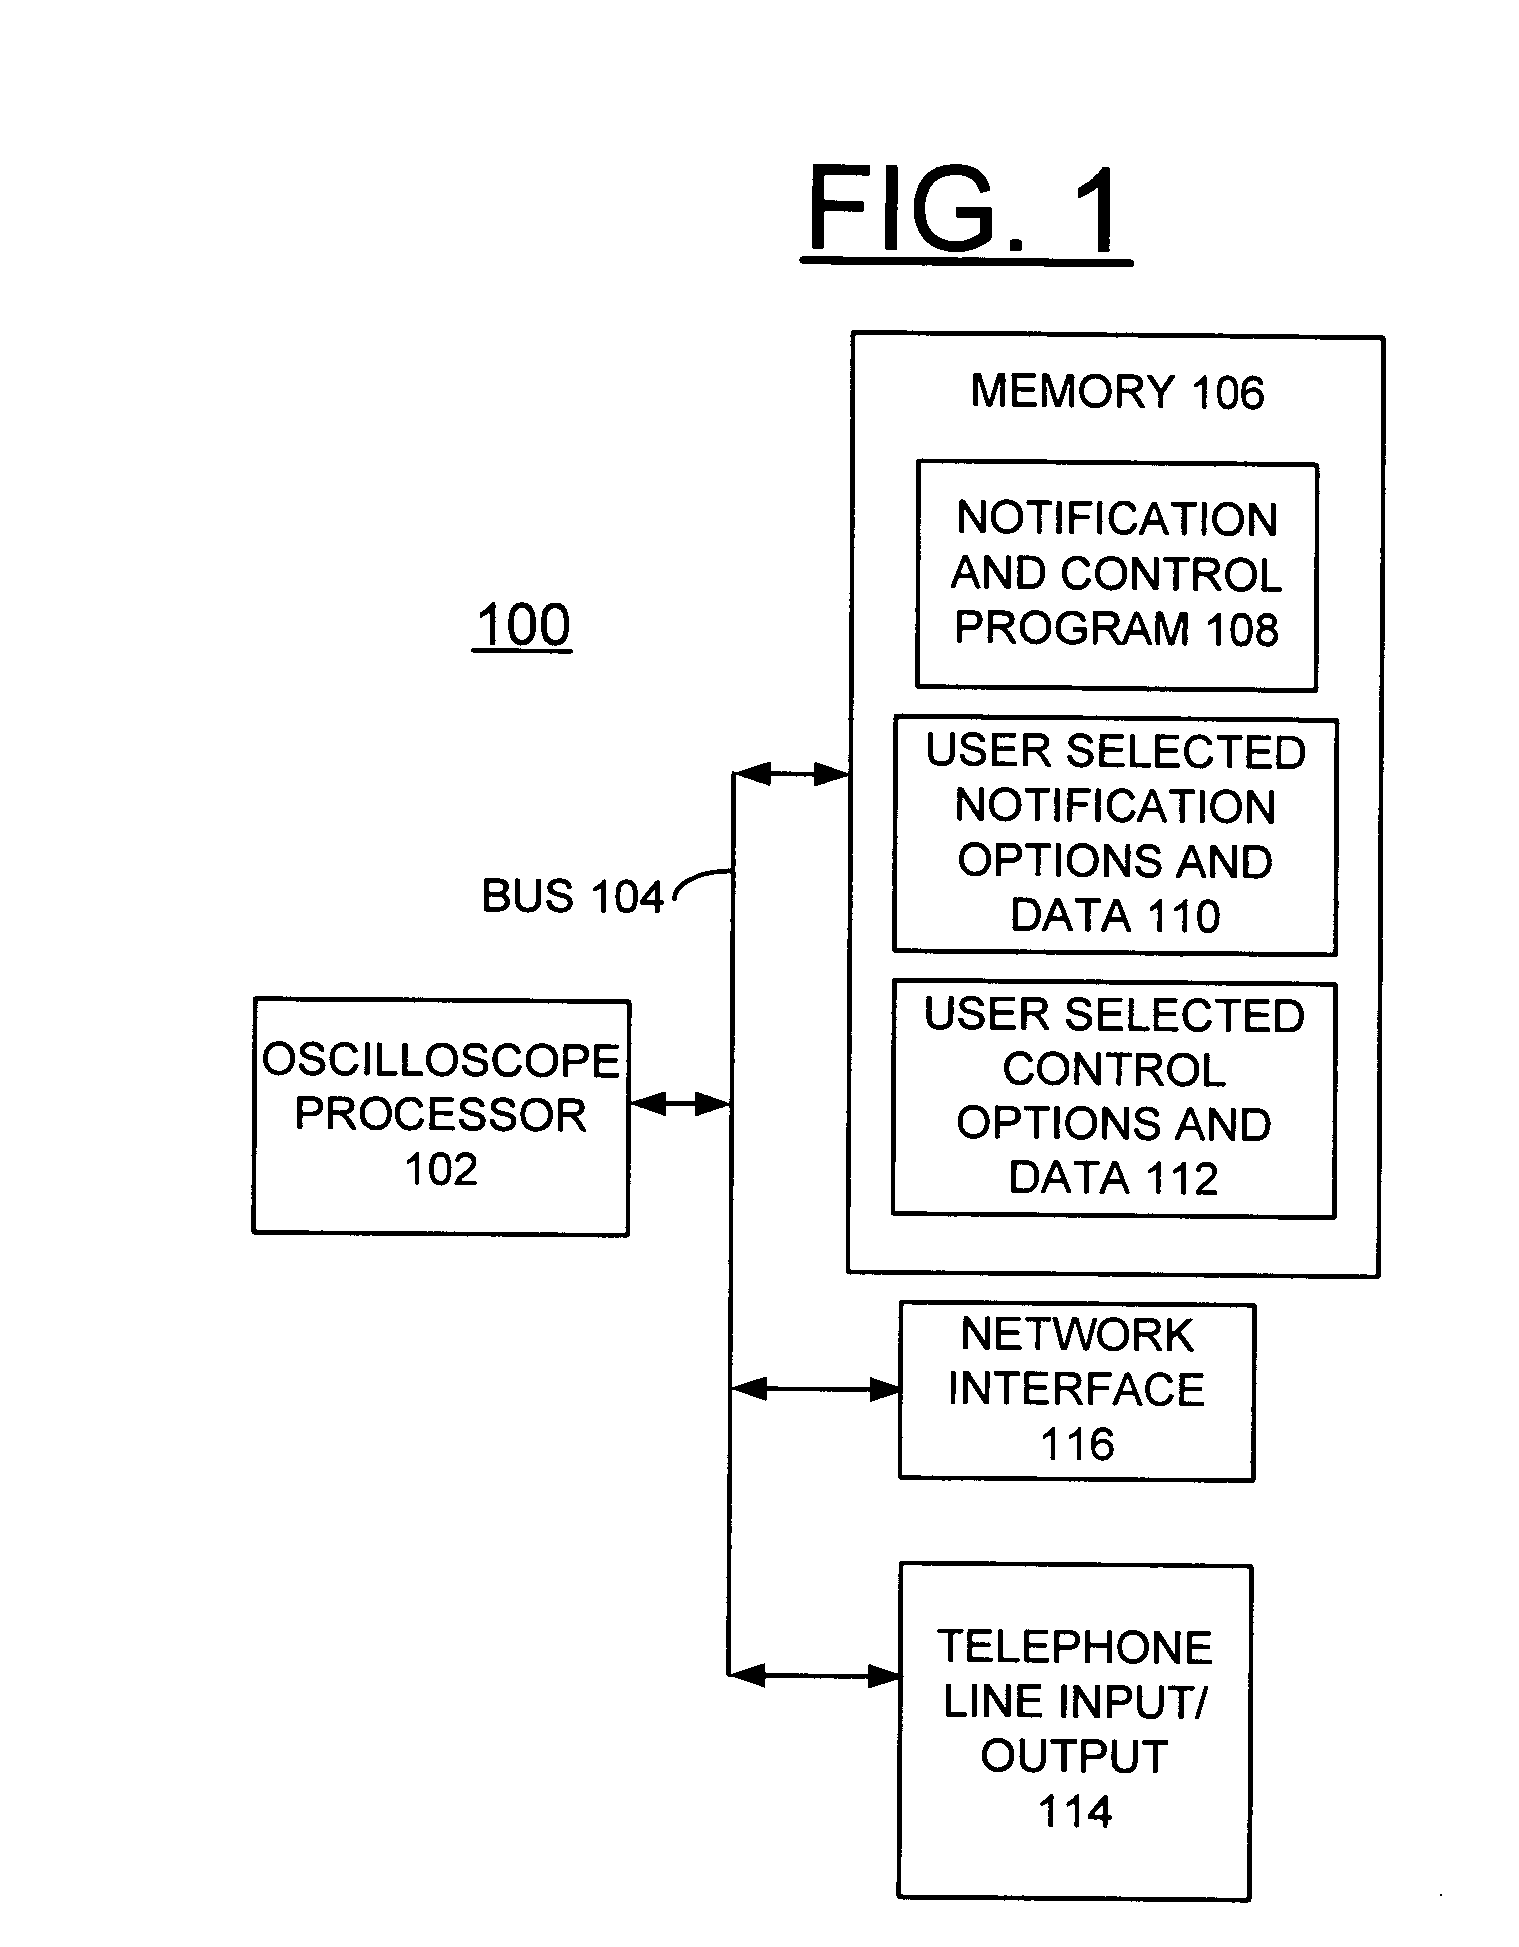 Method, apparatus and computer program product for implementing enhanced notification and control features in oscilloscopes